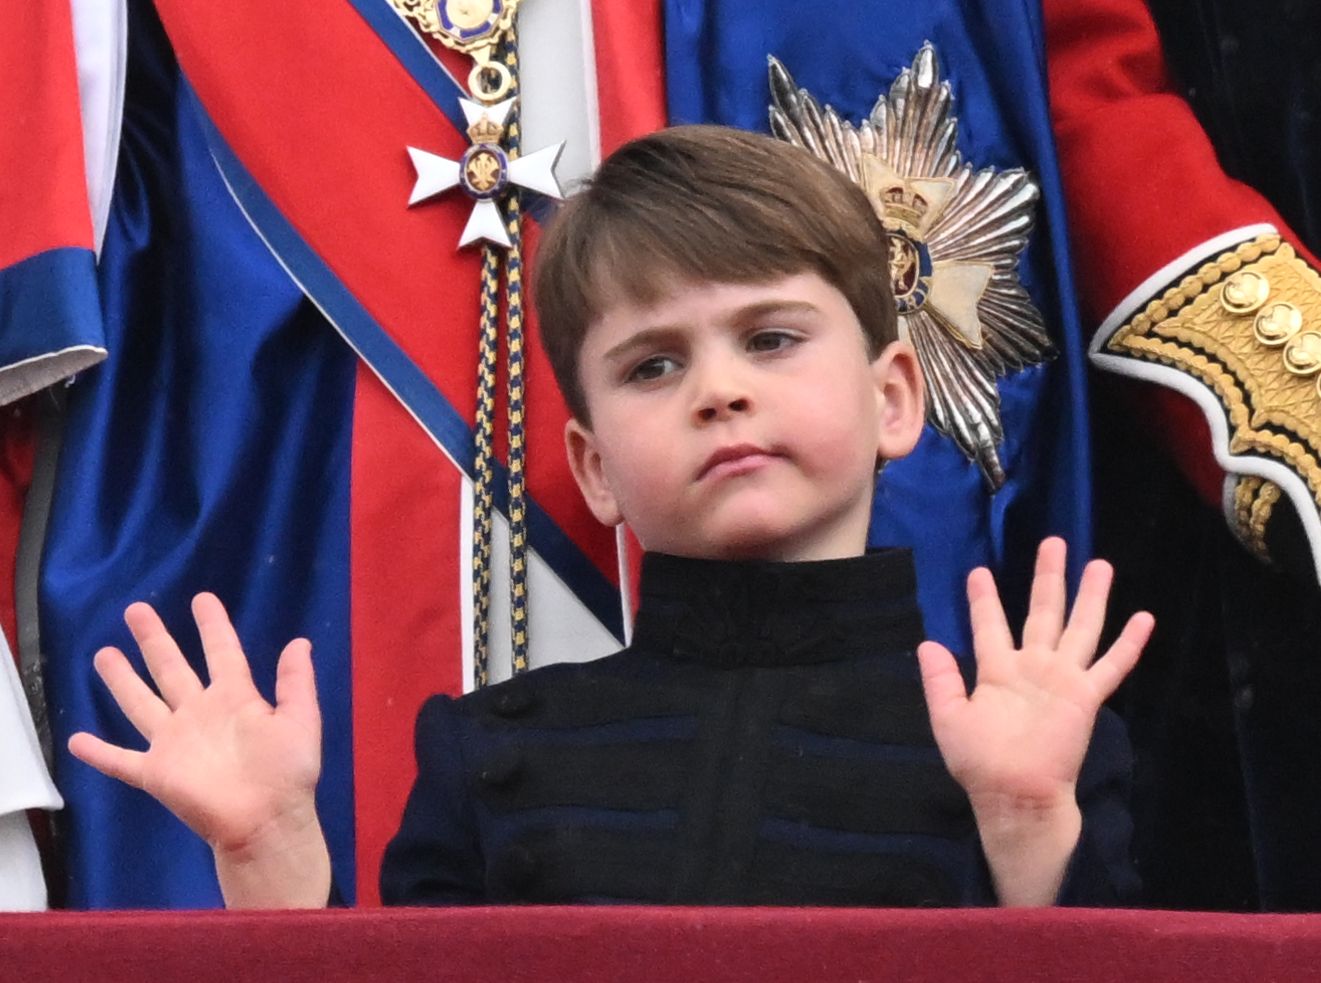 <p><span>Prince Louis was up to his usual antics while on the balcony of Buckingham Palace in London following the </span><a href="https://www.wonderwall.com/celebrity/the-coronation-of-king-charles-iii-and-queen-camilla-the-best-pictures-of-all-the-royals-at-this-historic-event-735015.gallery">coronation</a><span> of King Charles III on May 6, 2023.</span></p><p>MORE: <a href="https://www.wonderwall.com/celebrity/royals-line-british-throne-order-succession-3012158.gallery?photoId=648489">See the first 30 British royals in the line of success behind King Charles III</a></p>